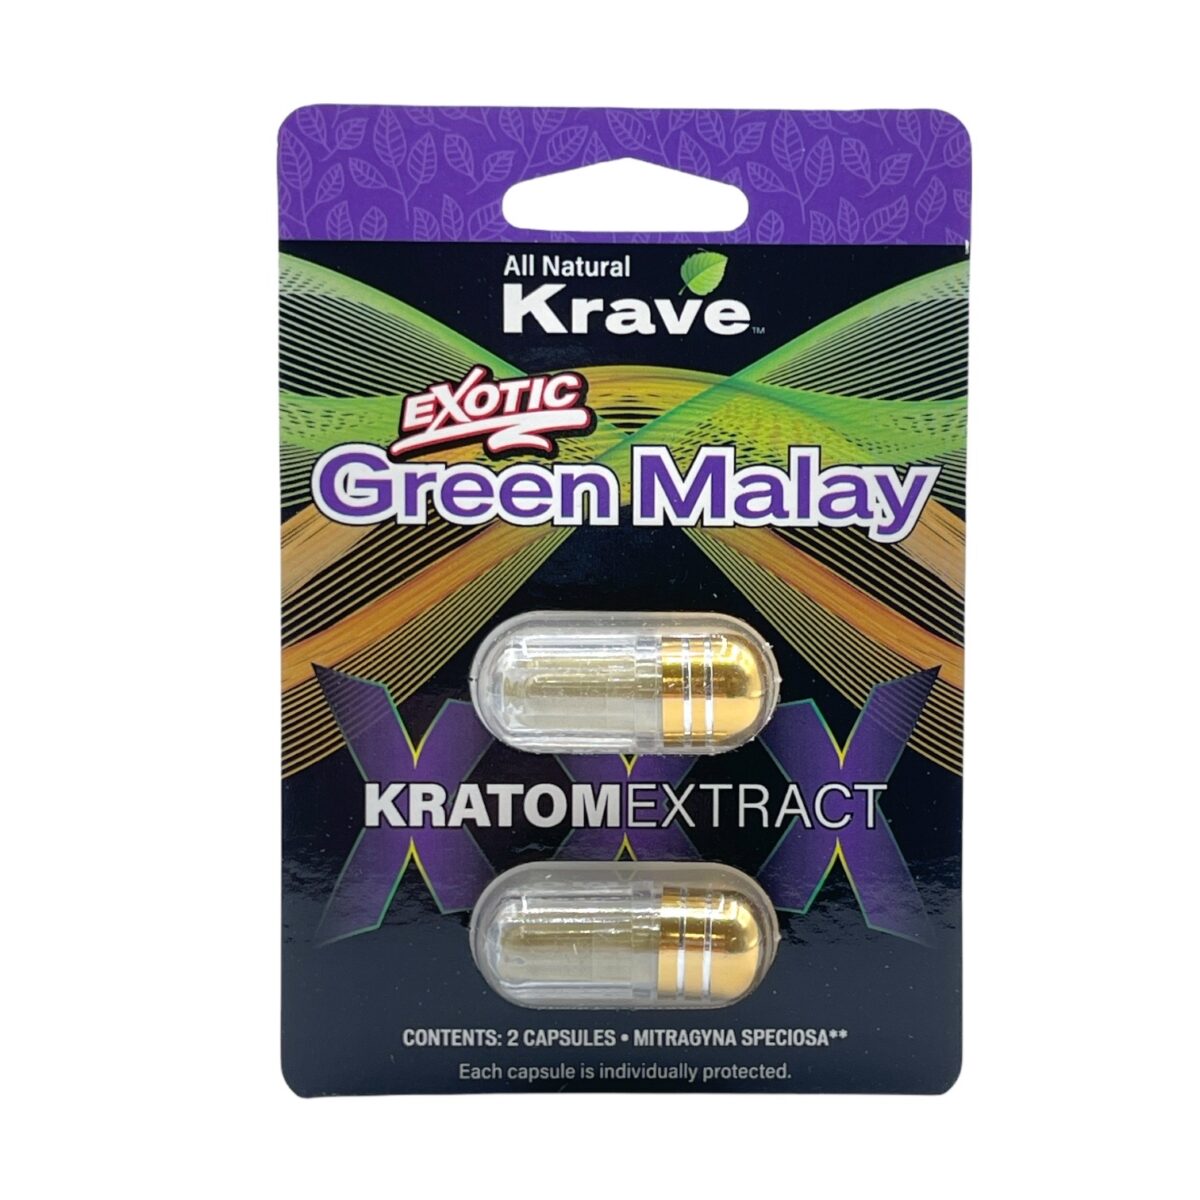 Krave Exotic Green Malay Kratom Extract Capsules – 2 count